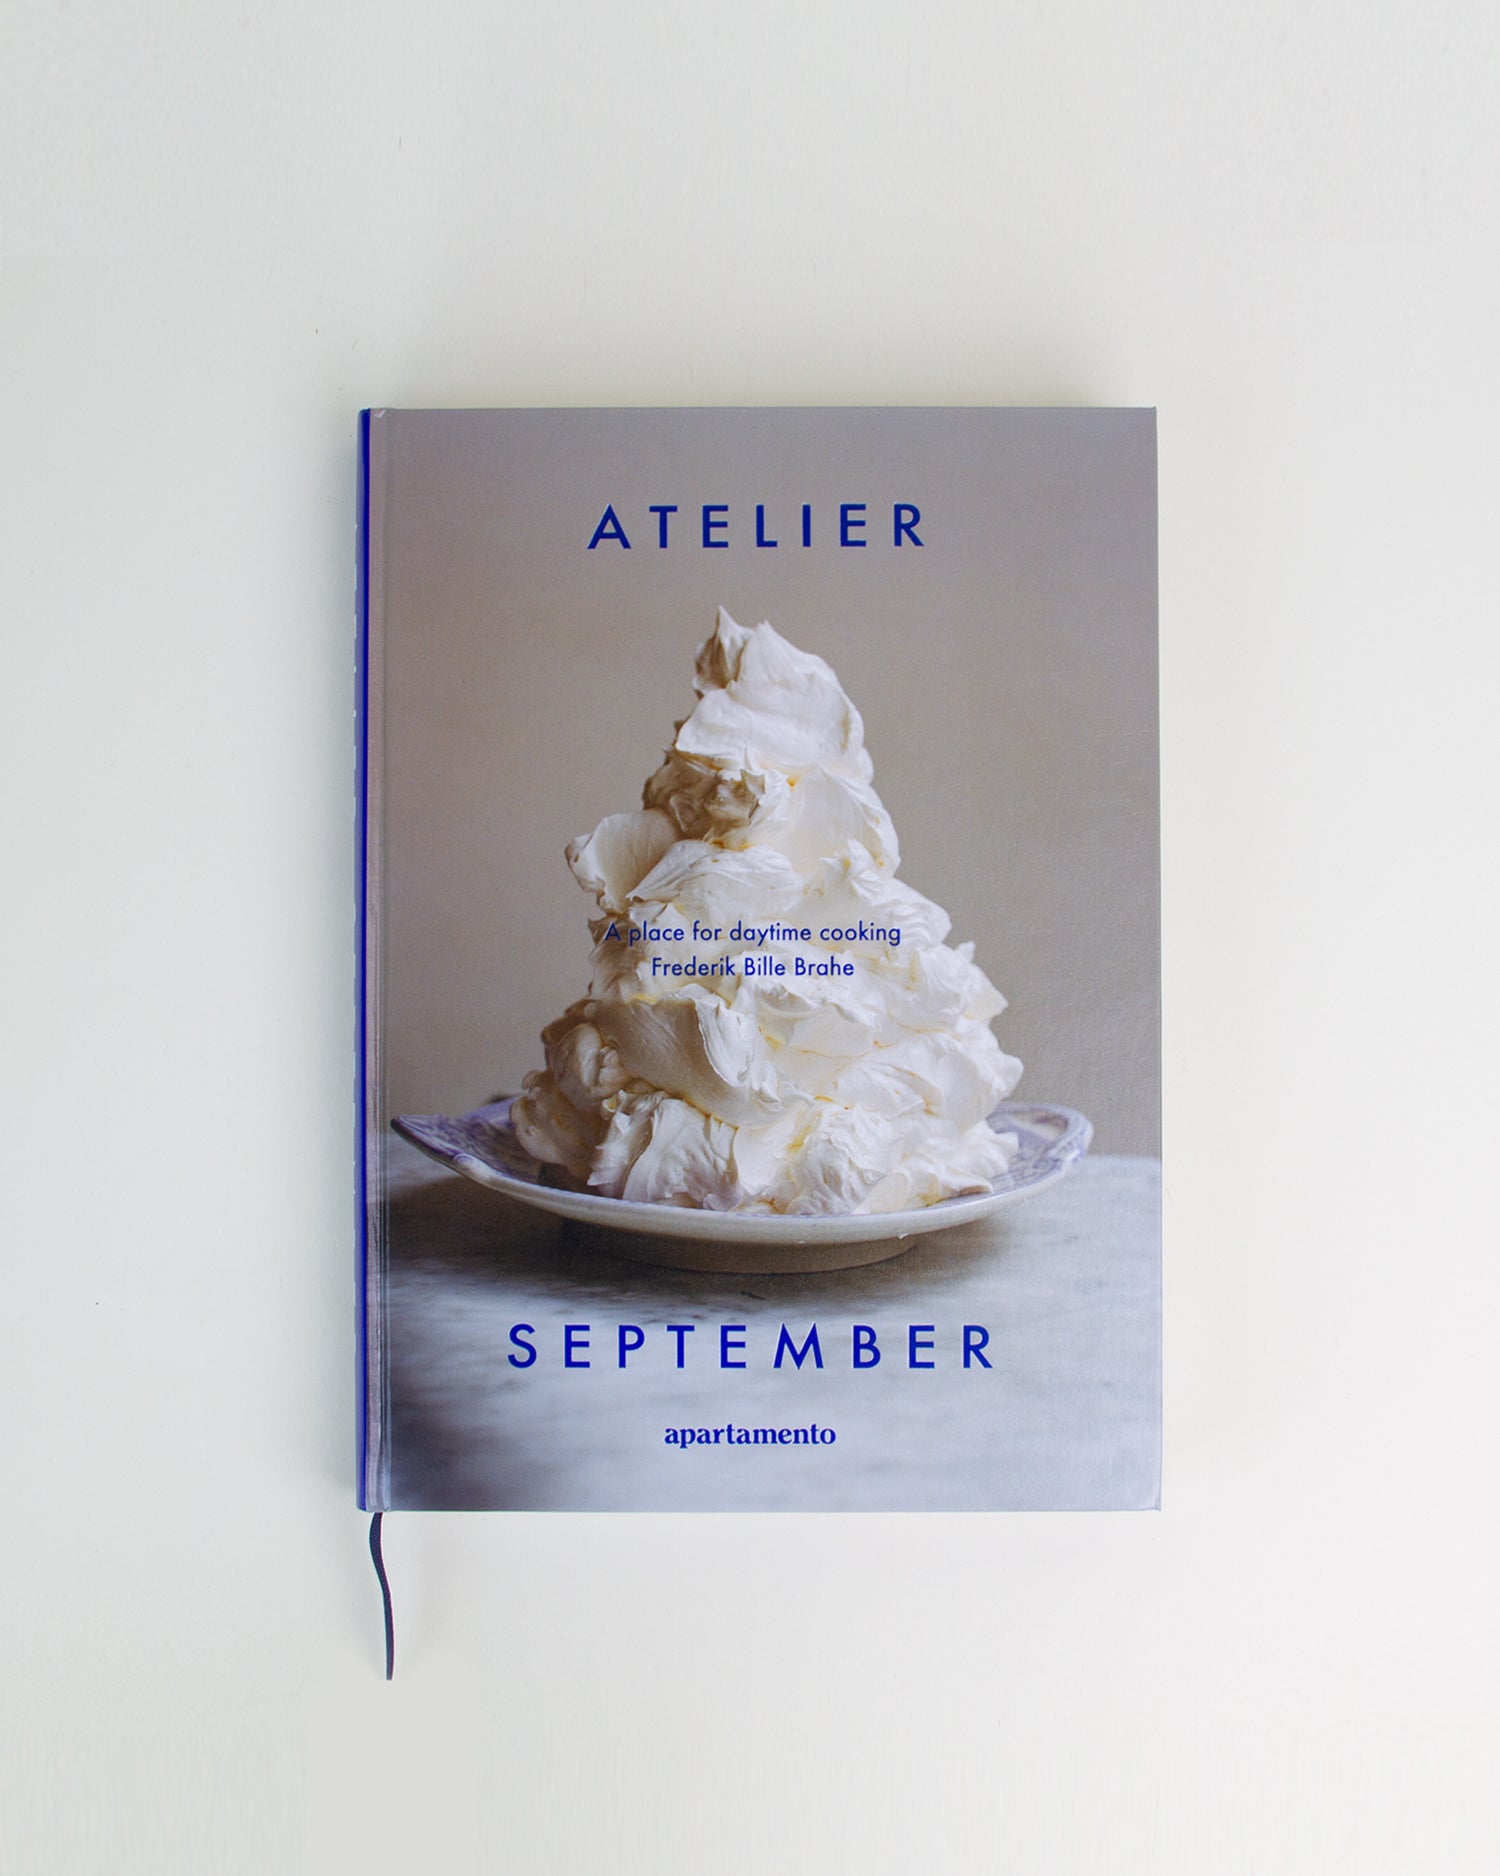 Atelier September: A Place For Daytime Cooking